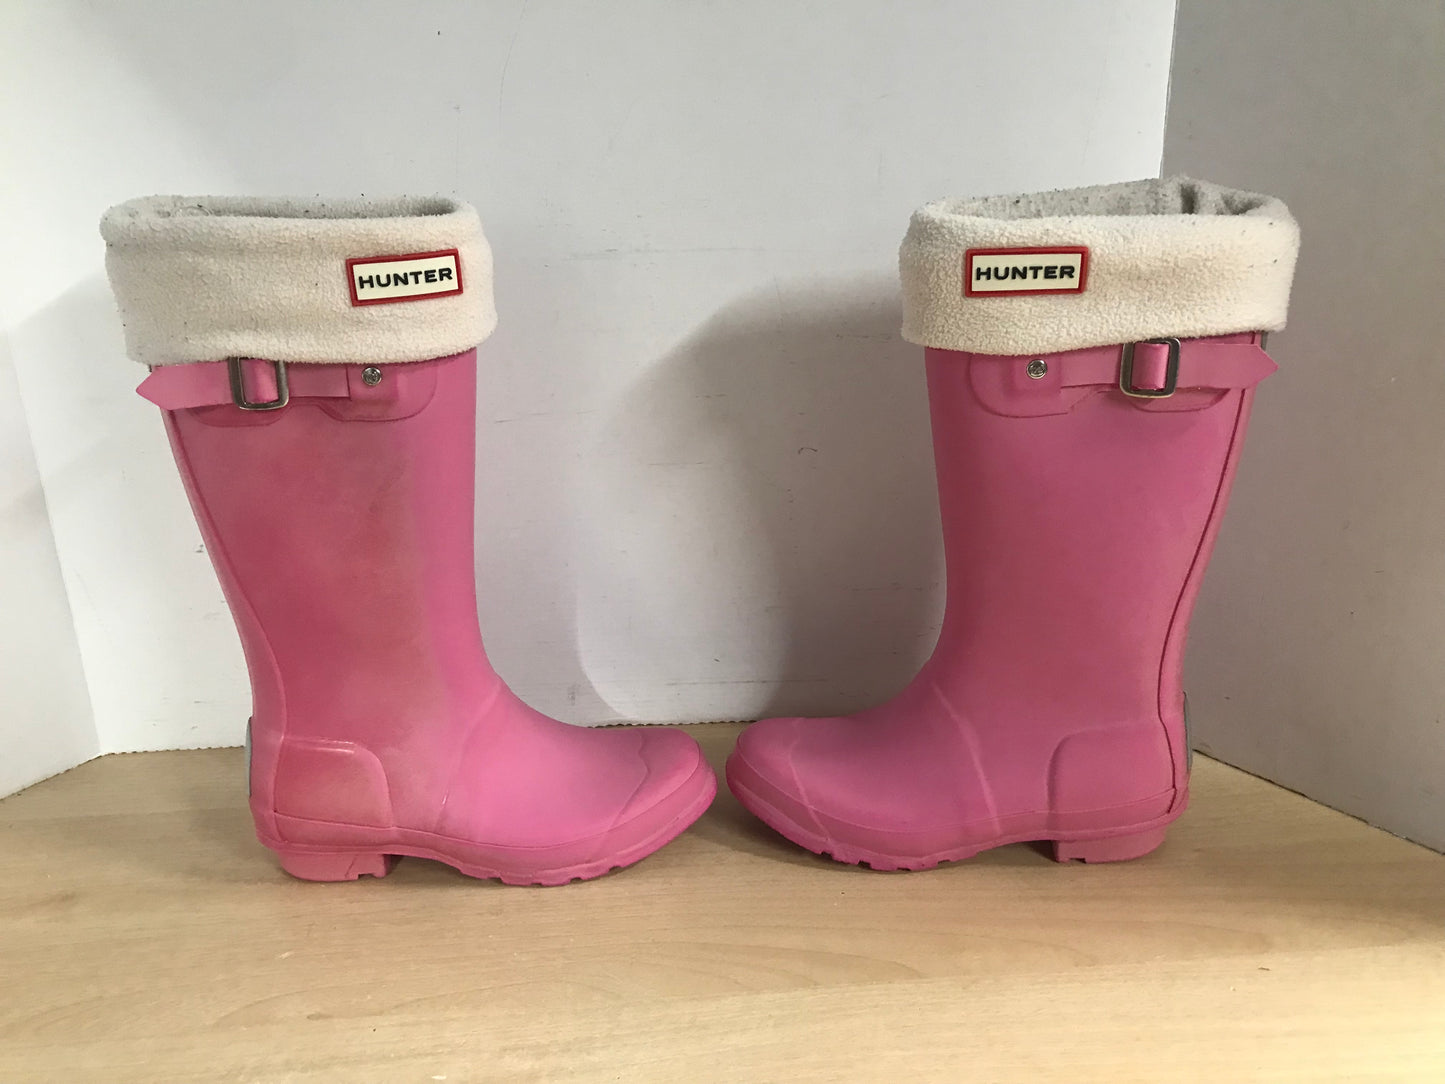 Hunter Rain Boots Child Size 3-4 Pink With Hunter Liner Some Color Wear